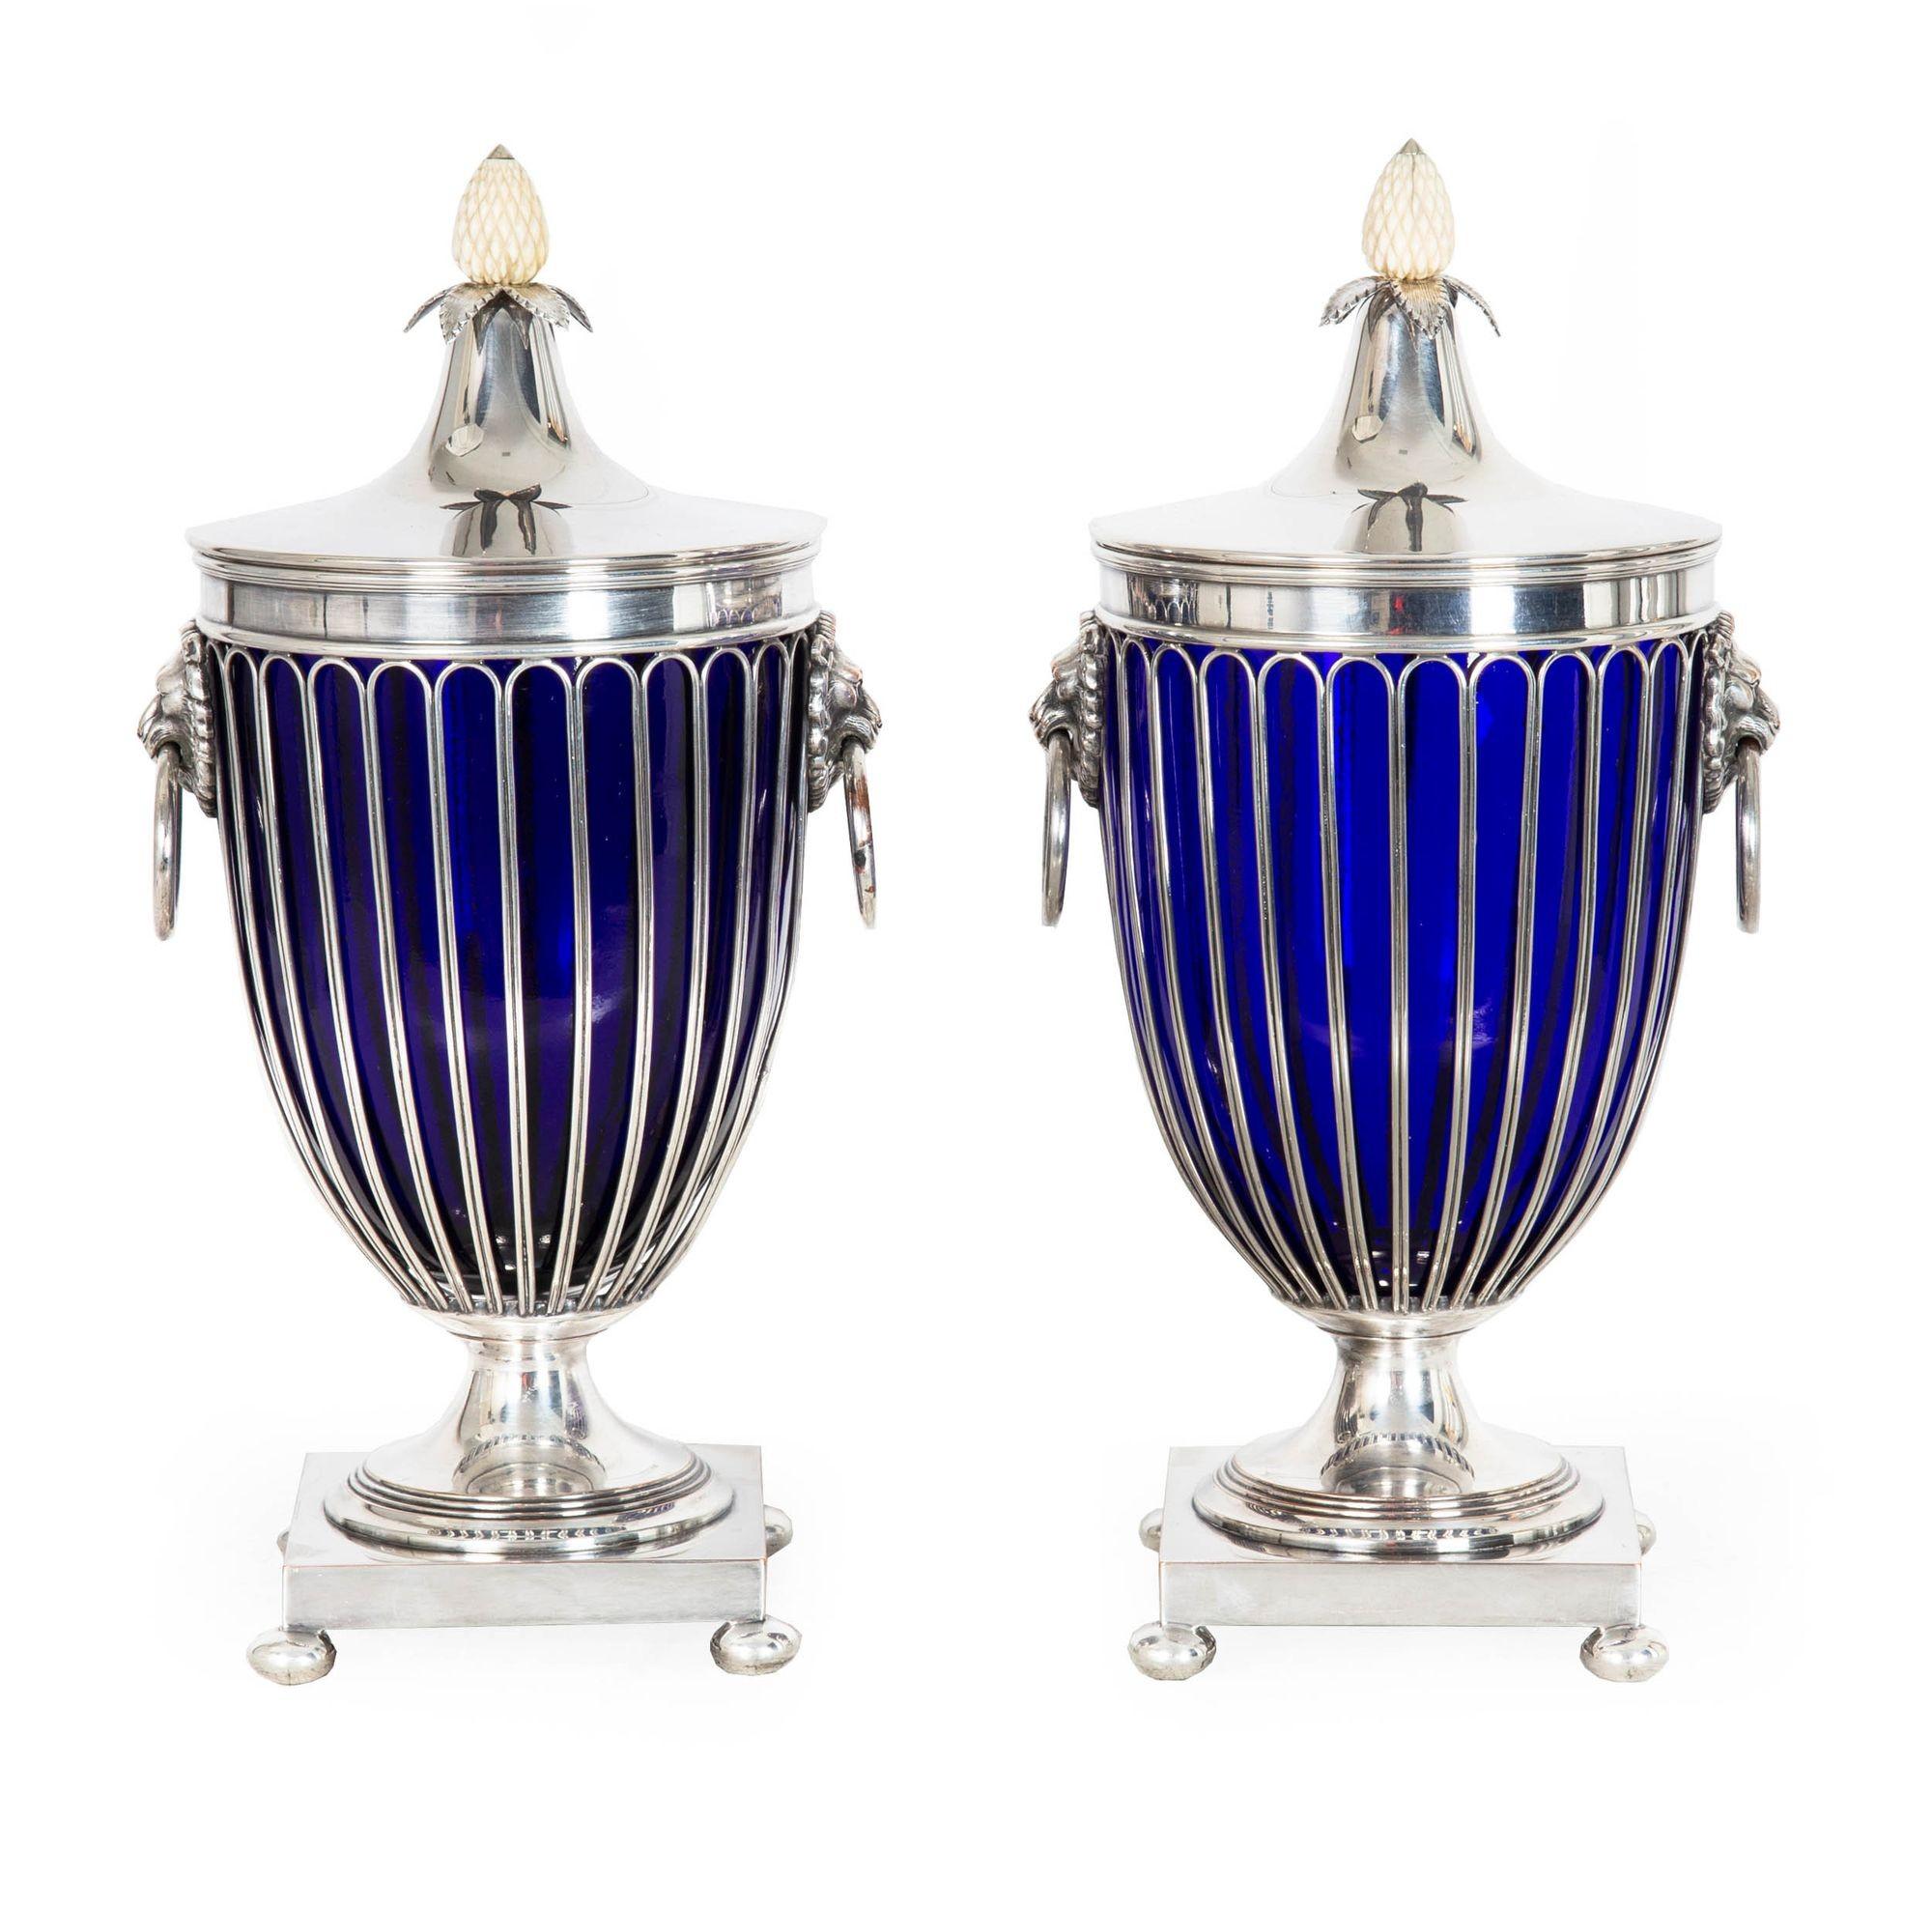 VERY FINE PAIR OF ENGLISH SILVERPLATED COBALT GLASS CHESTNUT URNS
Marked for Barker-Ellis of Birmingham, England  made circa 1912-1931  with maker's mark to underside [seven-branch menorah], signed 